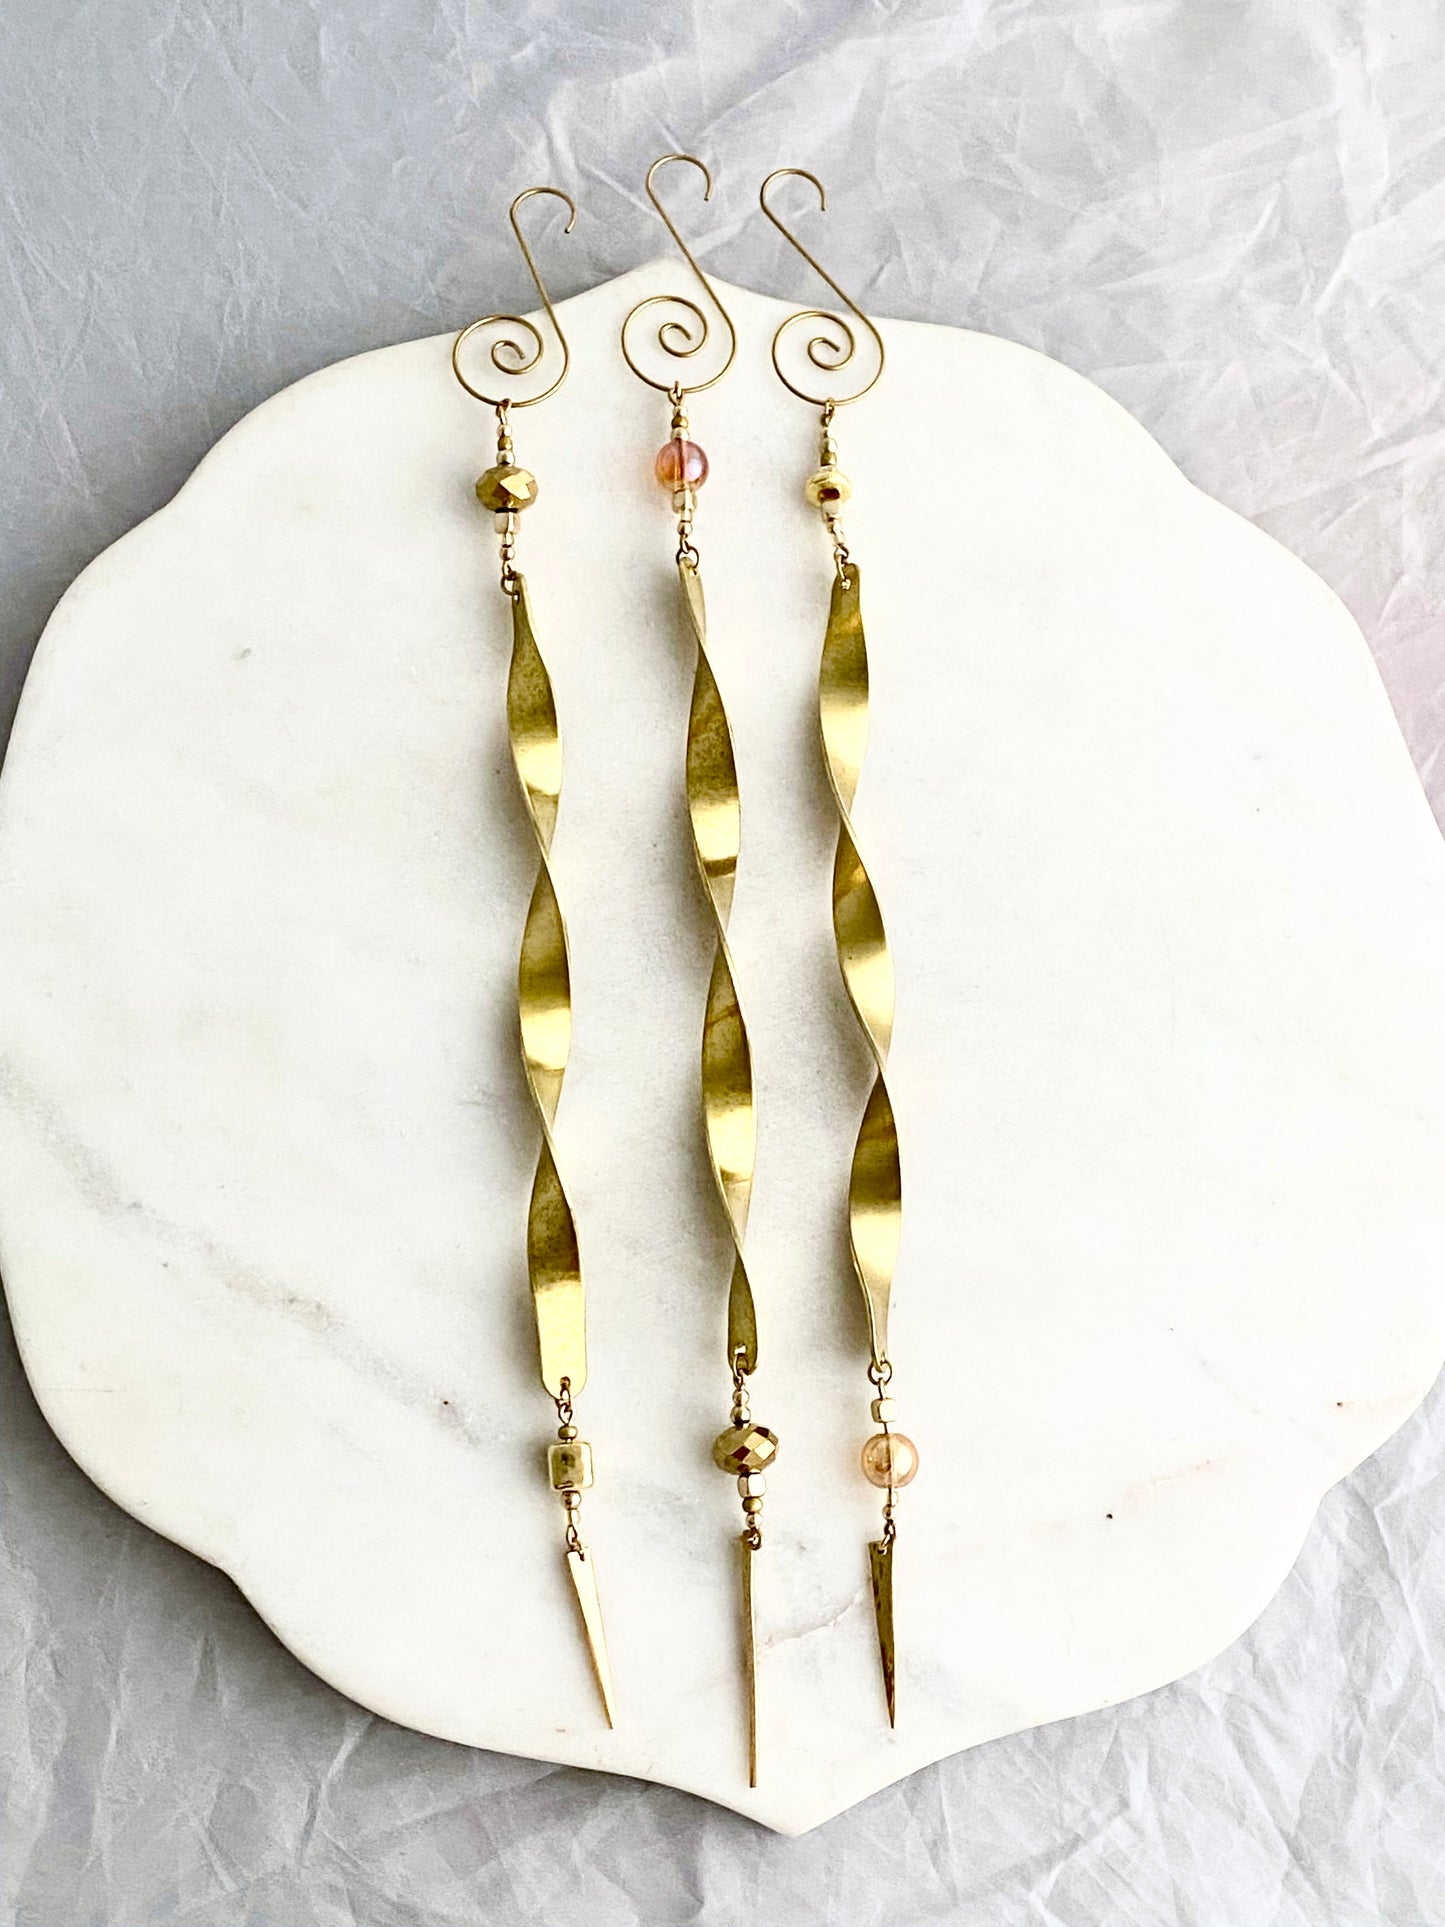 Golden Victorian Inspired Icicle Ornament Set of 3, Large Brass Icicle Decoration, Hand Made Christmas Ornament Ornaments callistafaye   